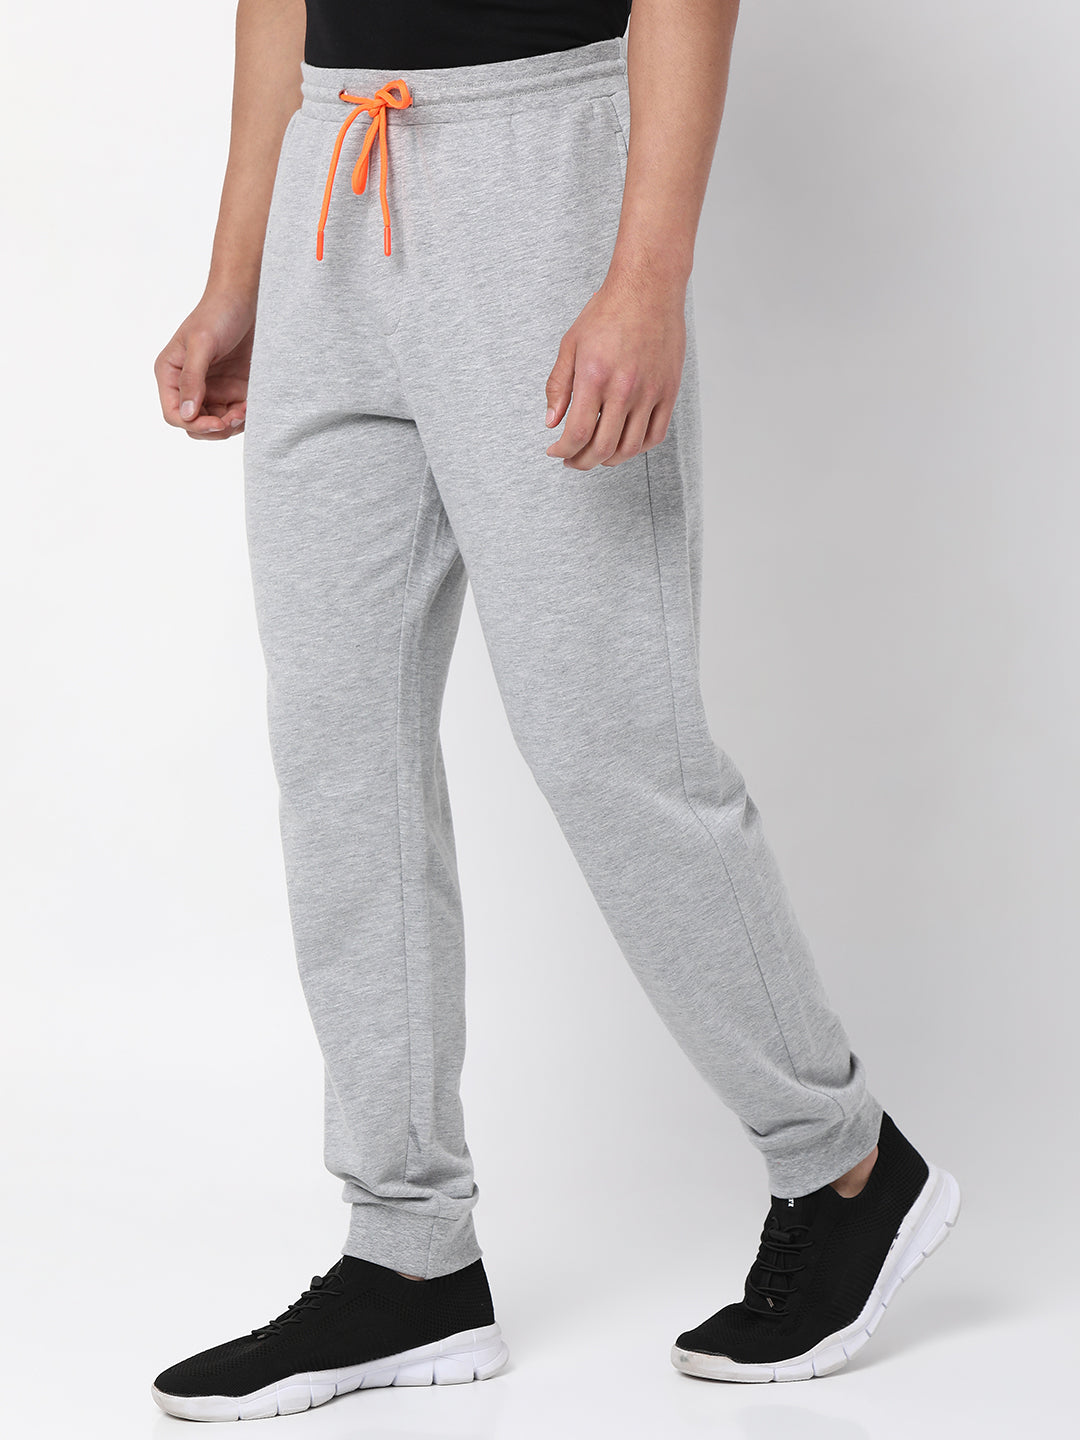 Men Premium Cotton Blend Knitted Grey Trackpants- UnderJeans by Spykar